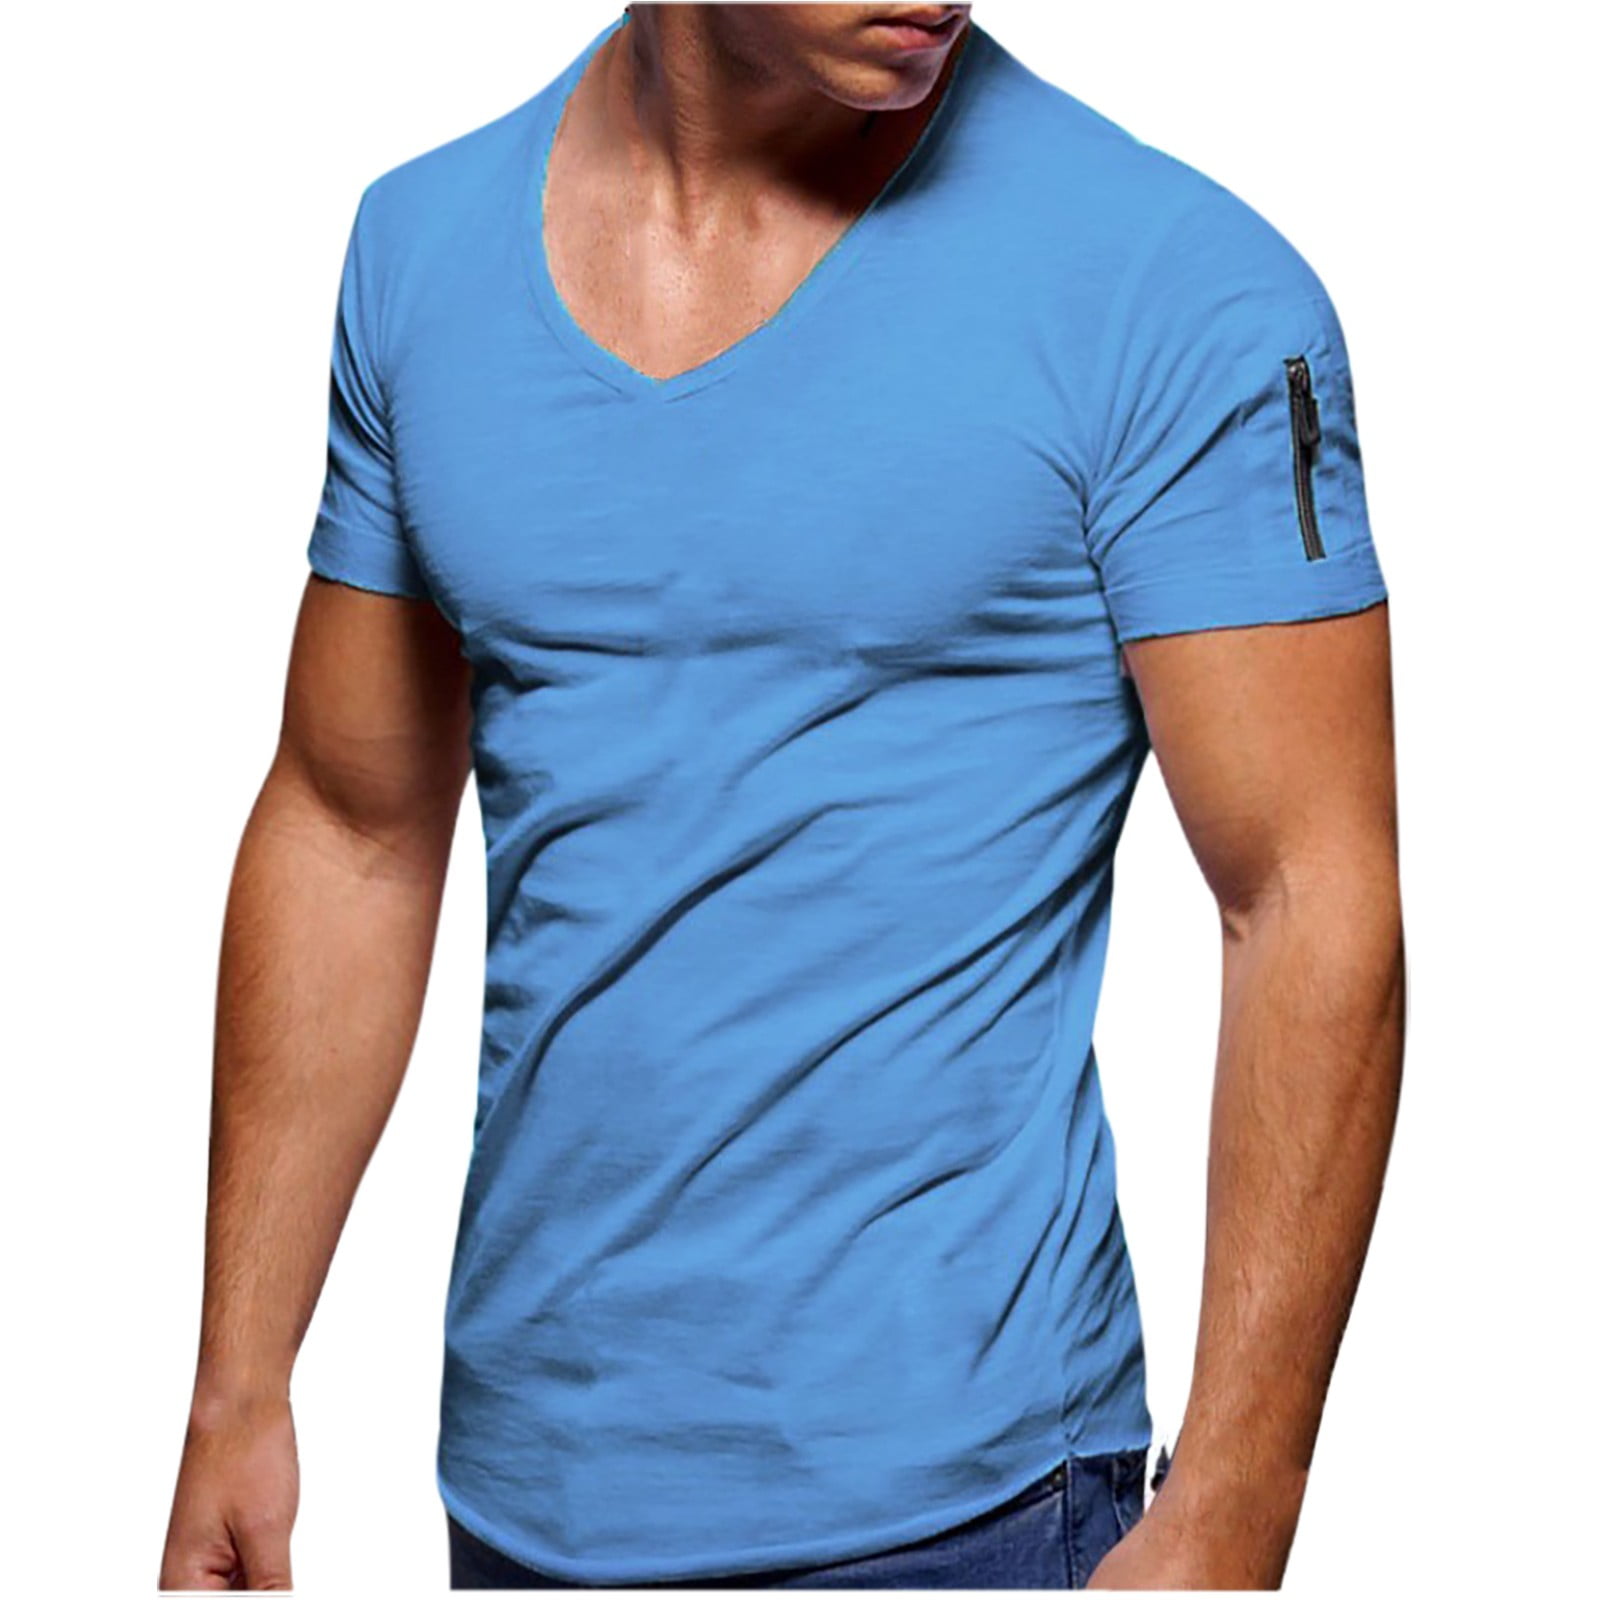 EQWLJWE Mens Muscle Workout T-Shirt Gym Bodybuilding Athletic T-Shirts  Fashion Slim Fit Short Sleeve Casual Tee Shirts 